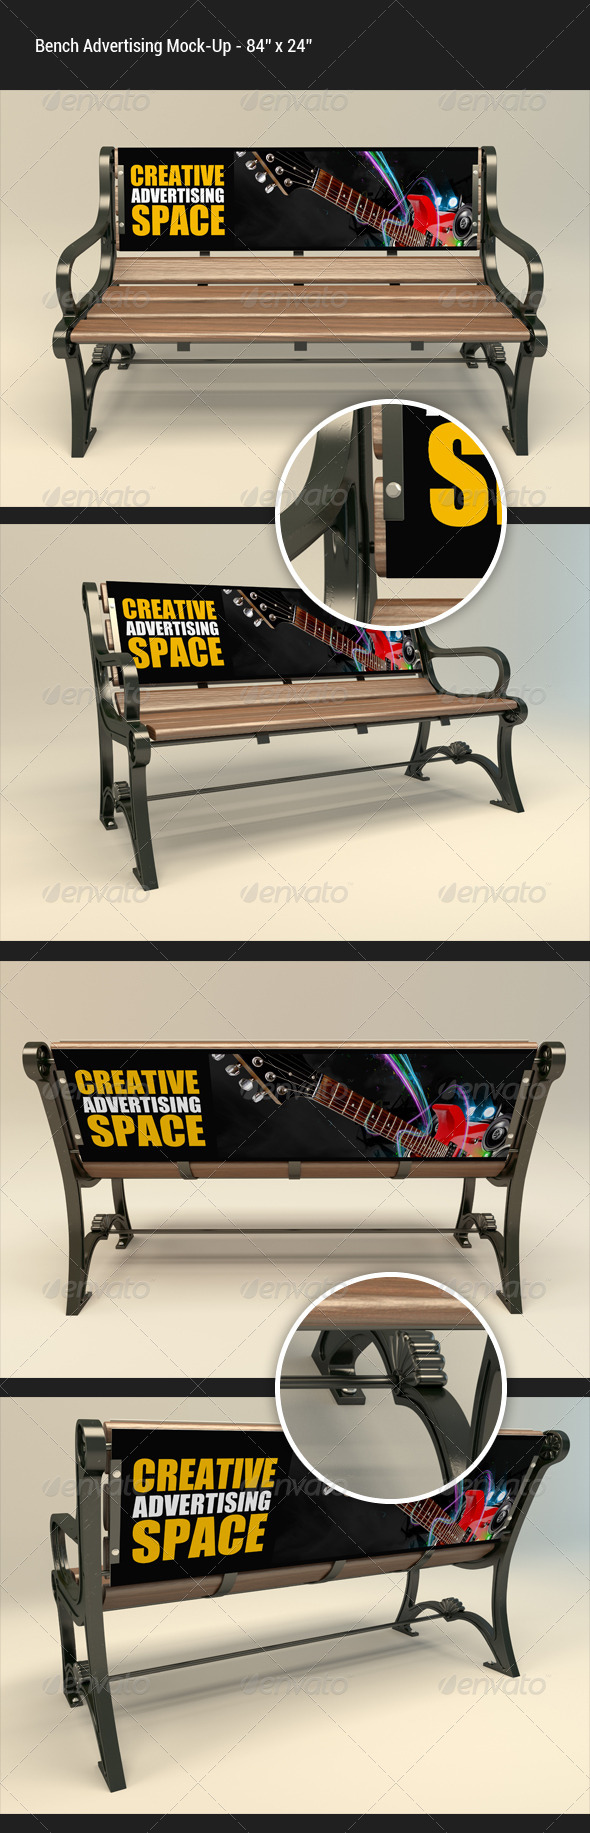 Bench Advertising Mock-Up Preview.jpg